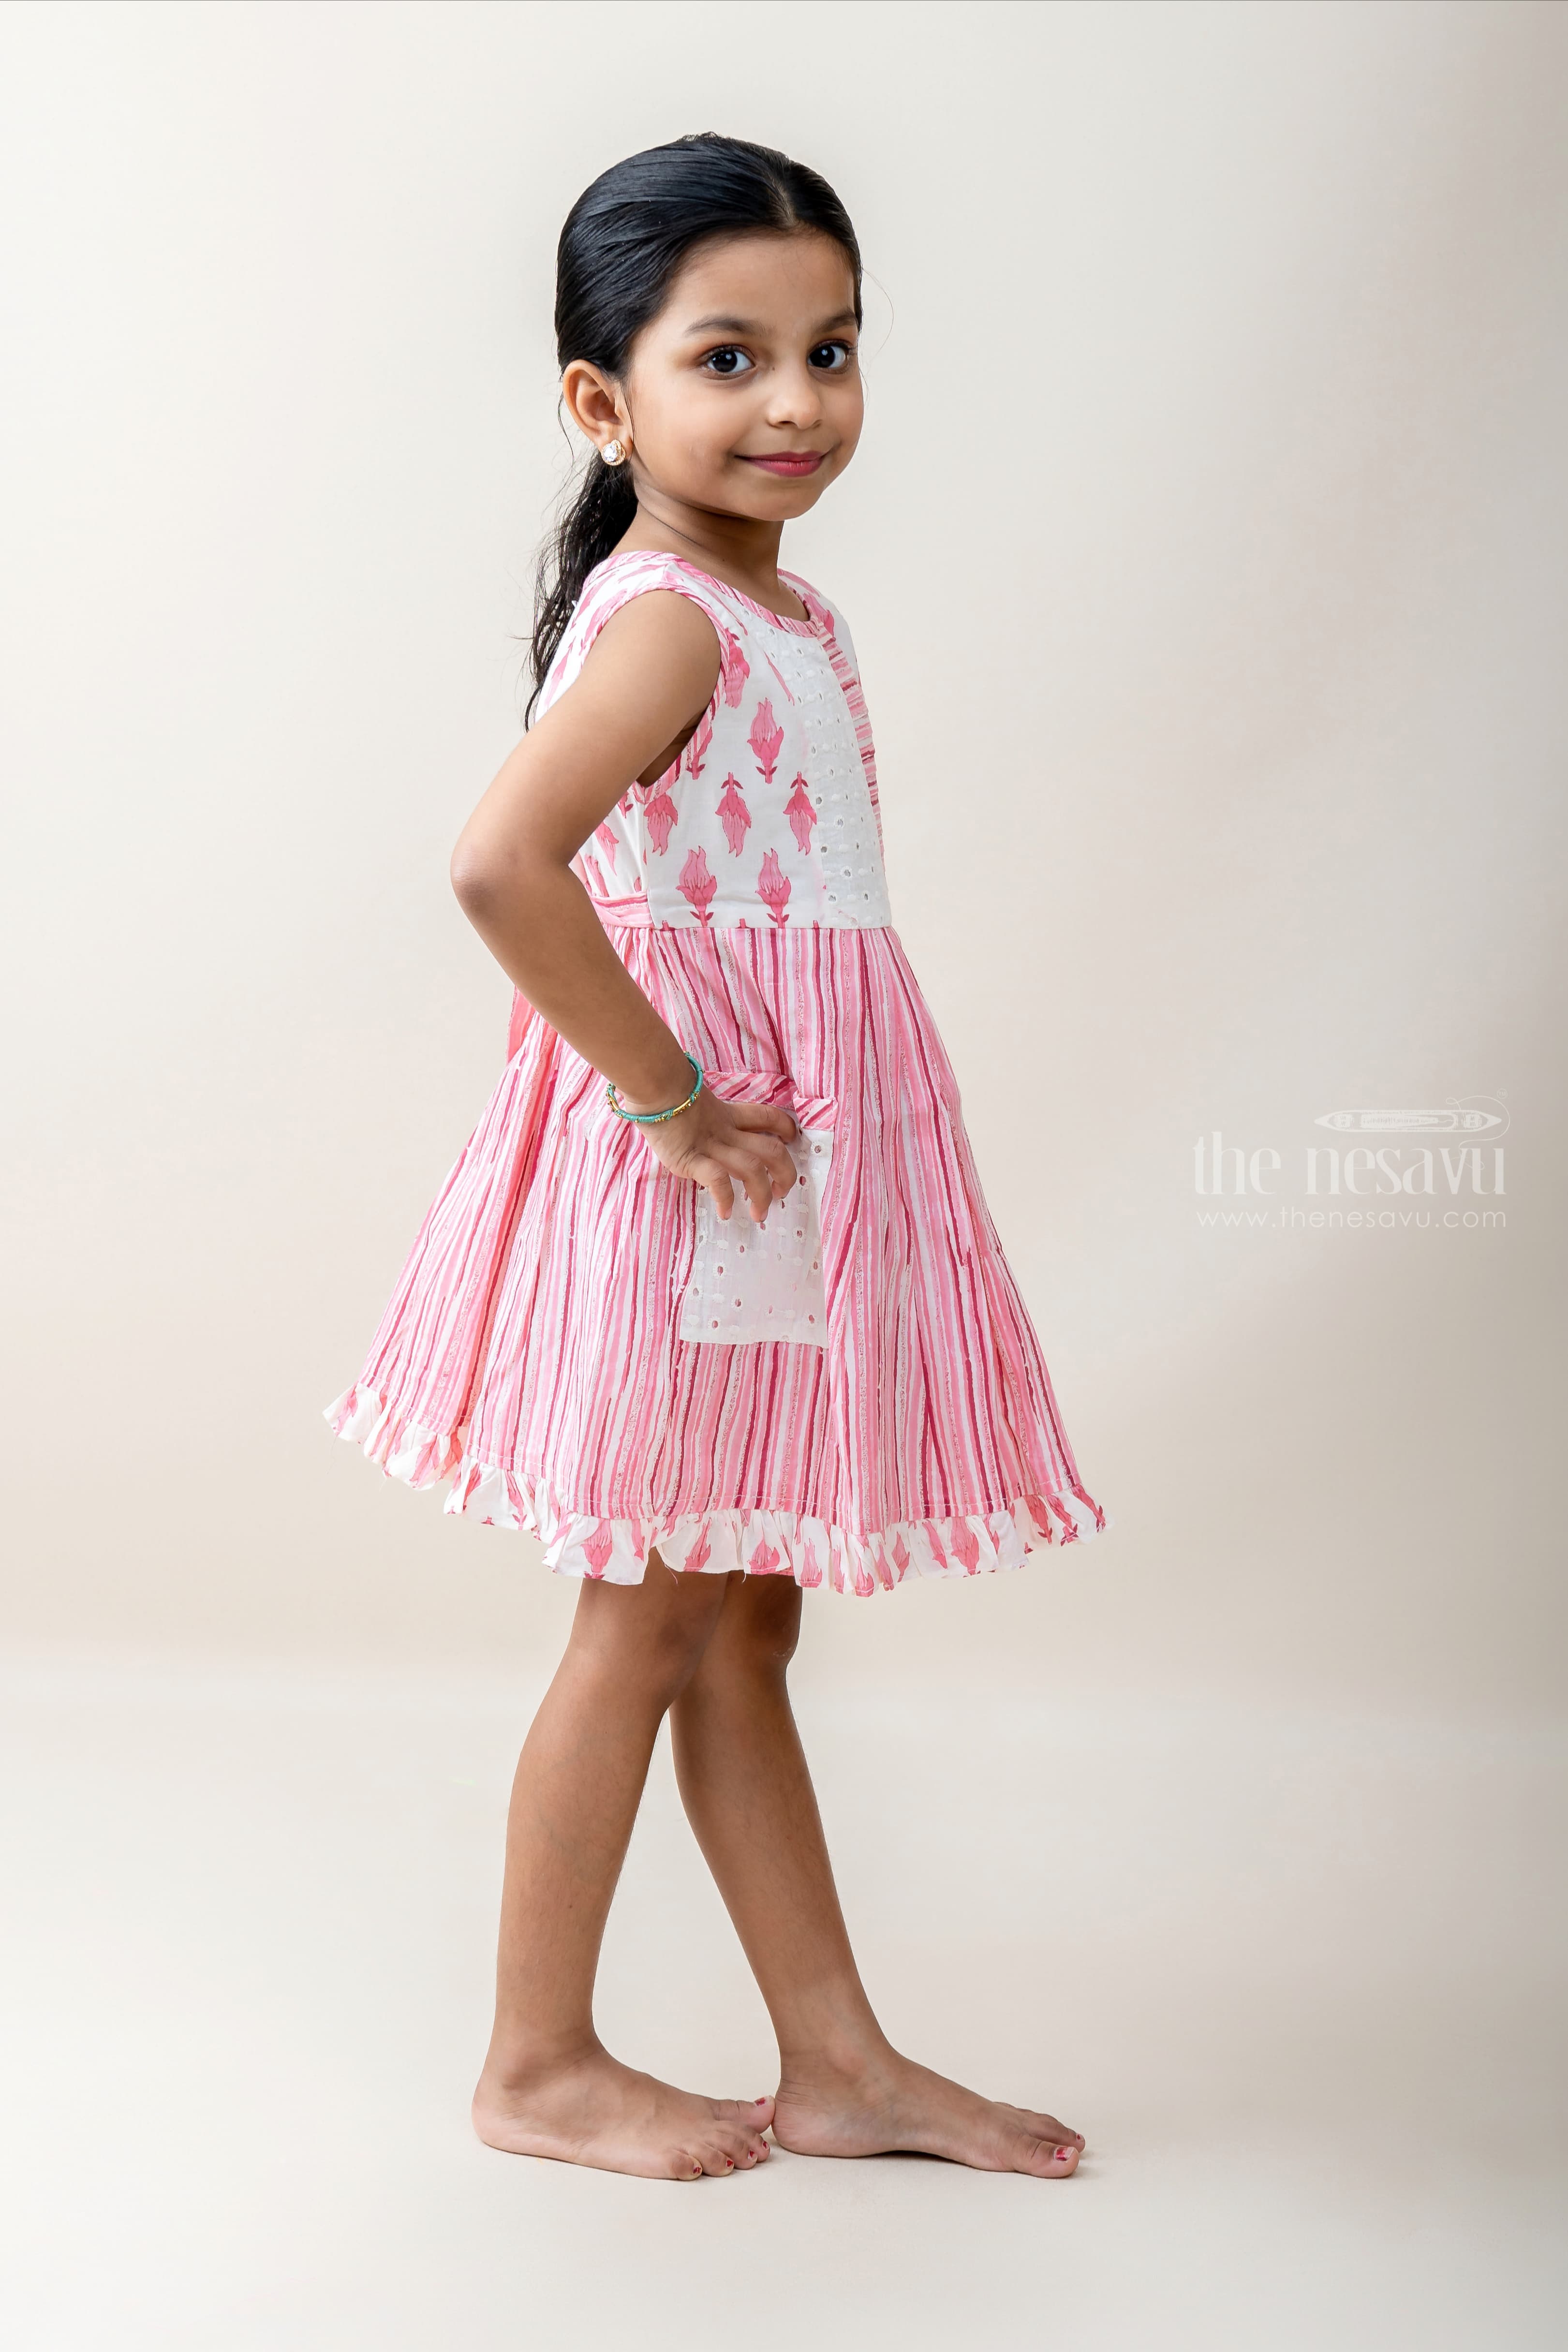 Details more than 174 stylish baby frocks designs